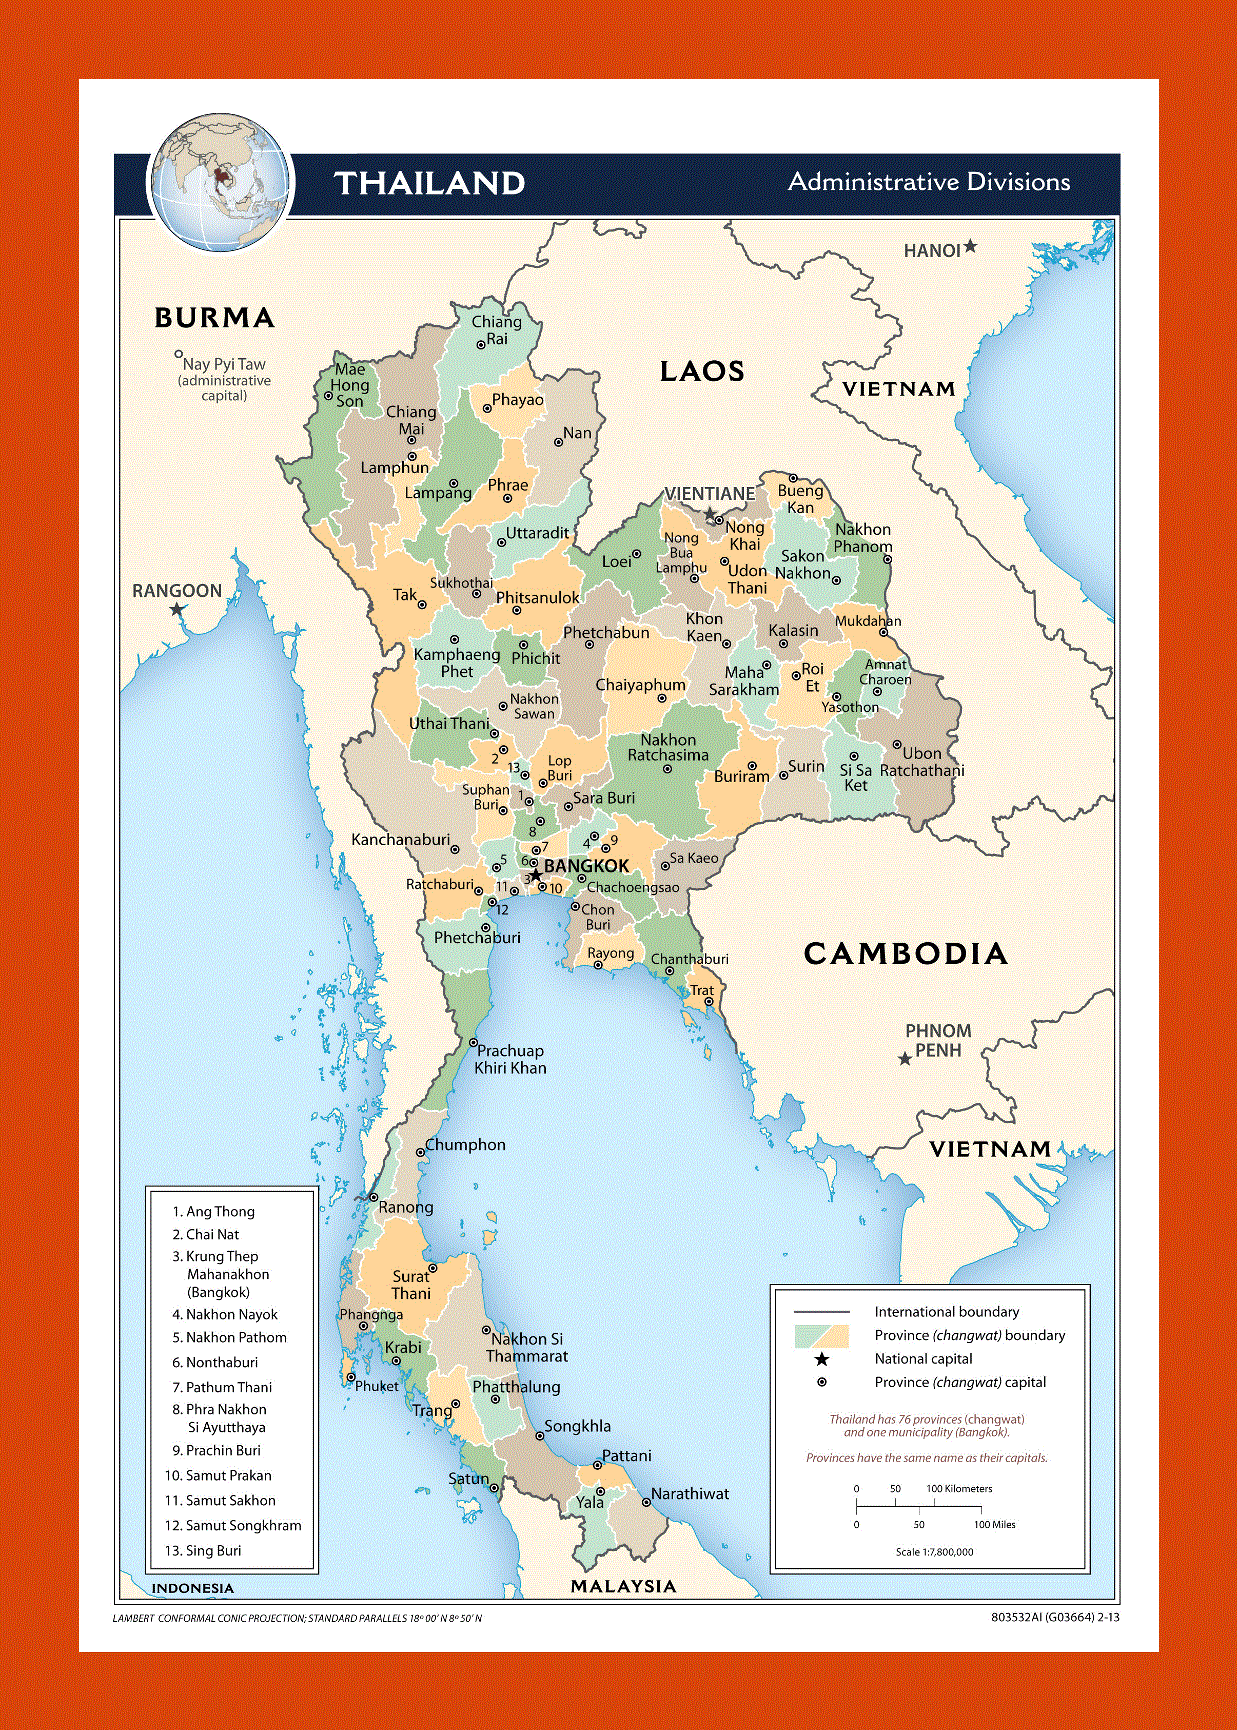 Administrative divisions map of Thailand - 2013